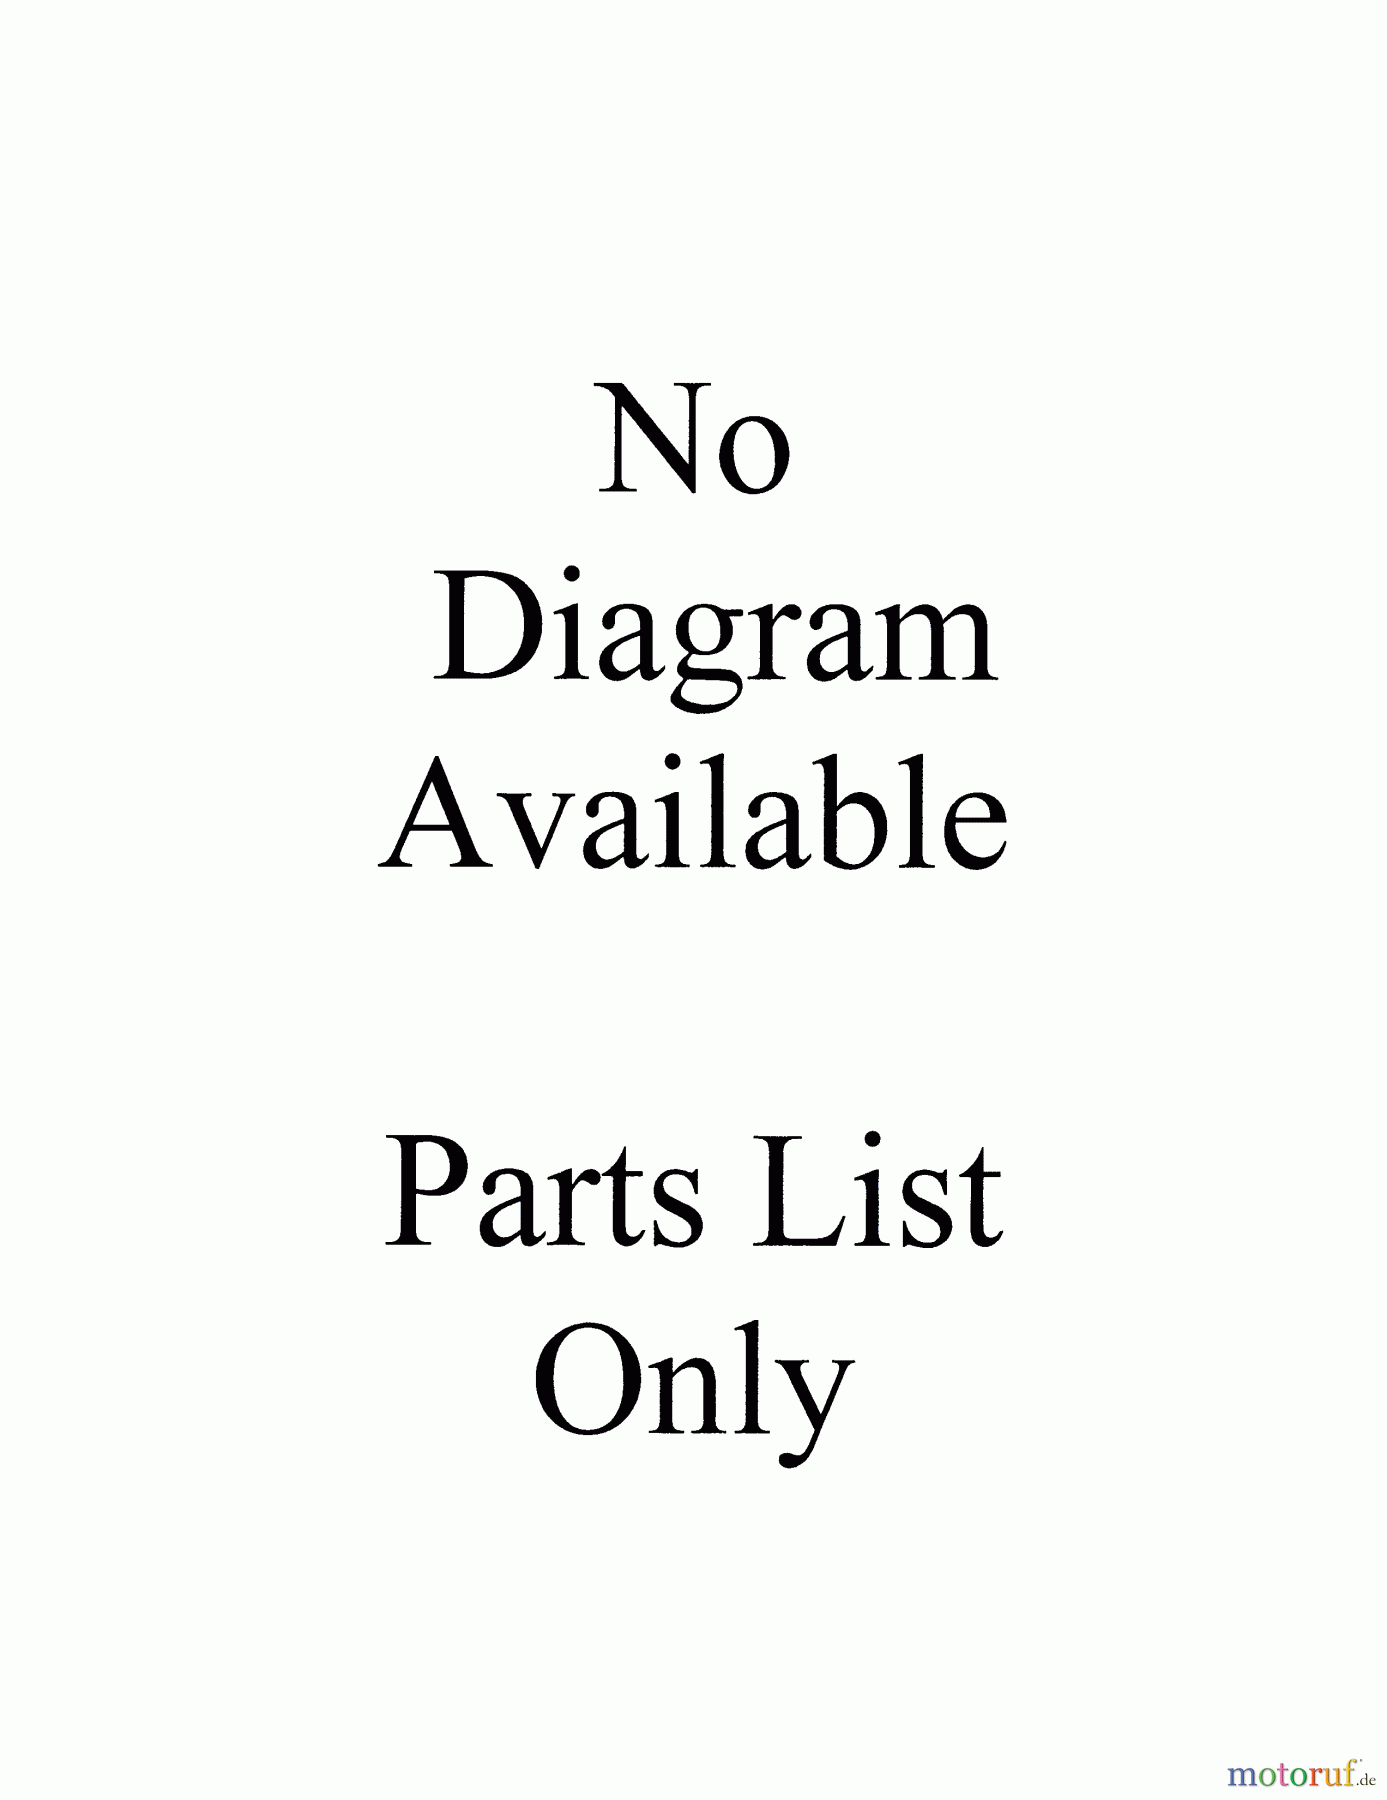  Toro Neu Accessories, Mower 07-10EC01 (E-81) - Toro E-81 Rear Engine Rider Charging Unit, 1980 PARTS LIST FOR CHARGER UNIT FACTORY ORDER NUMBER 8-1560